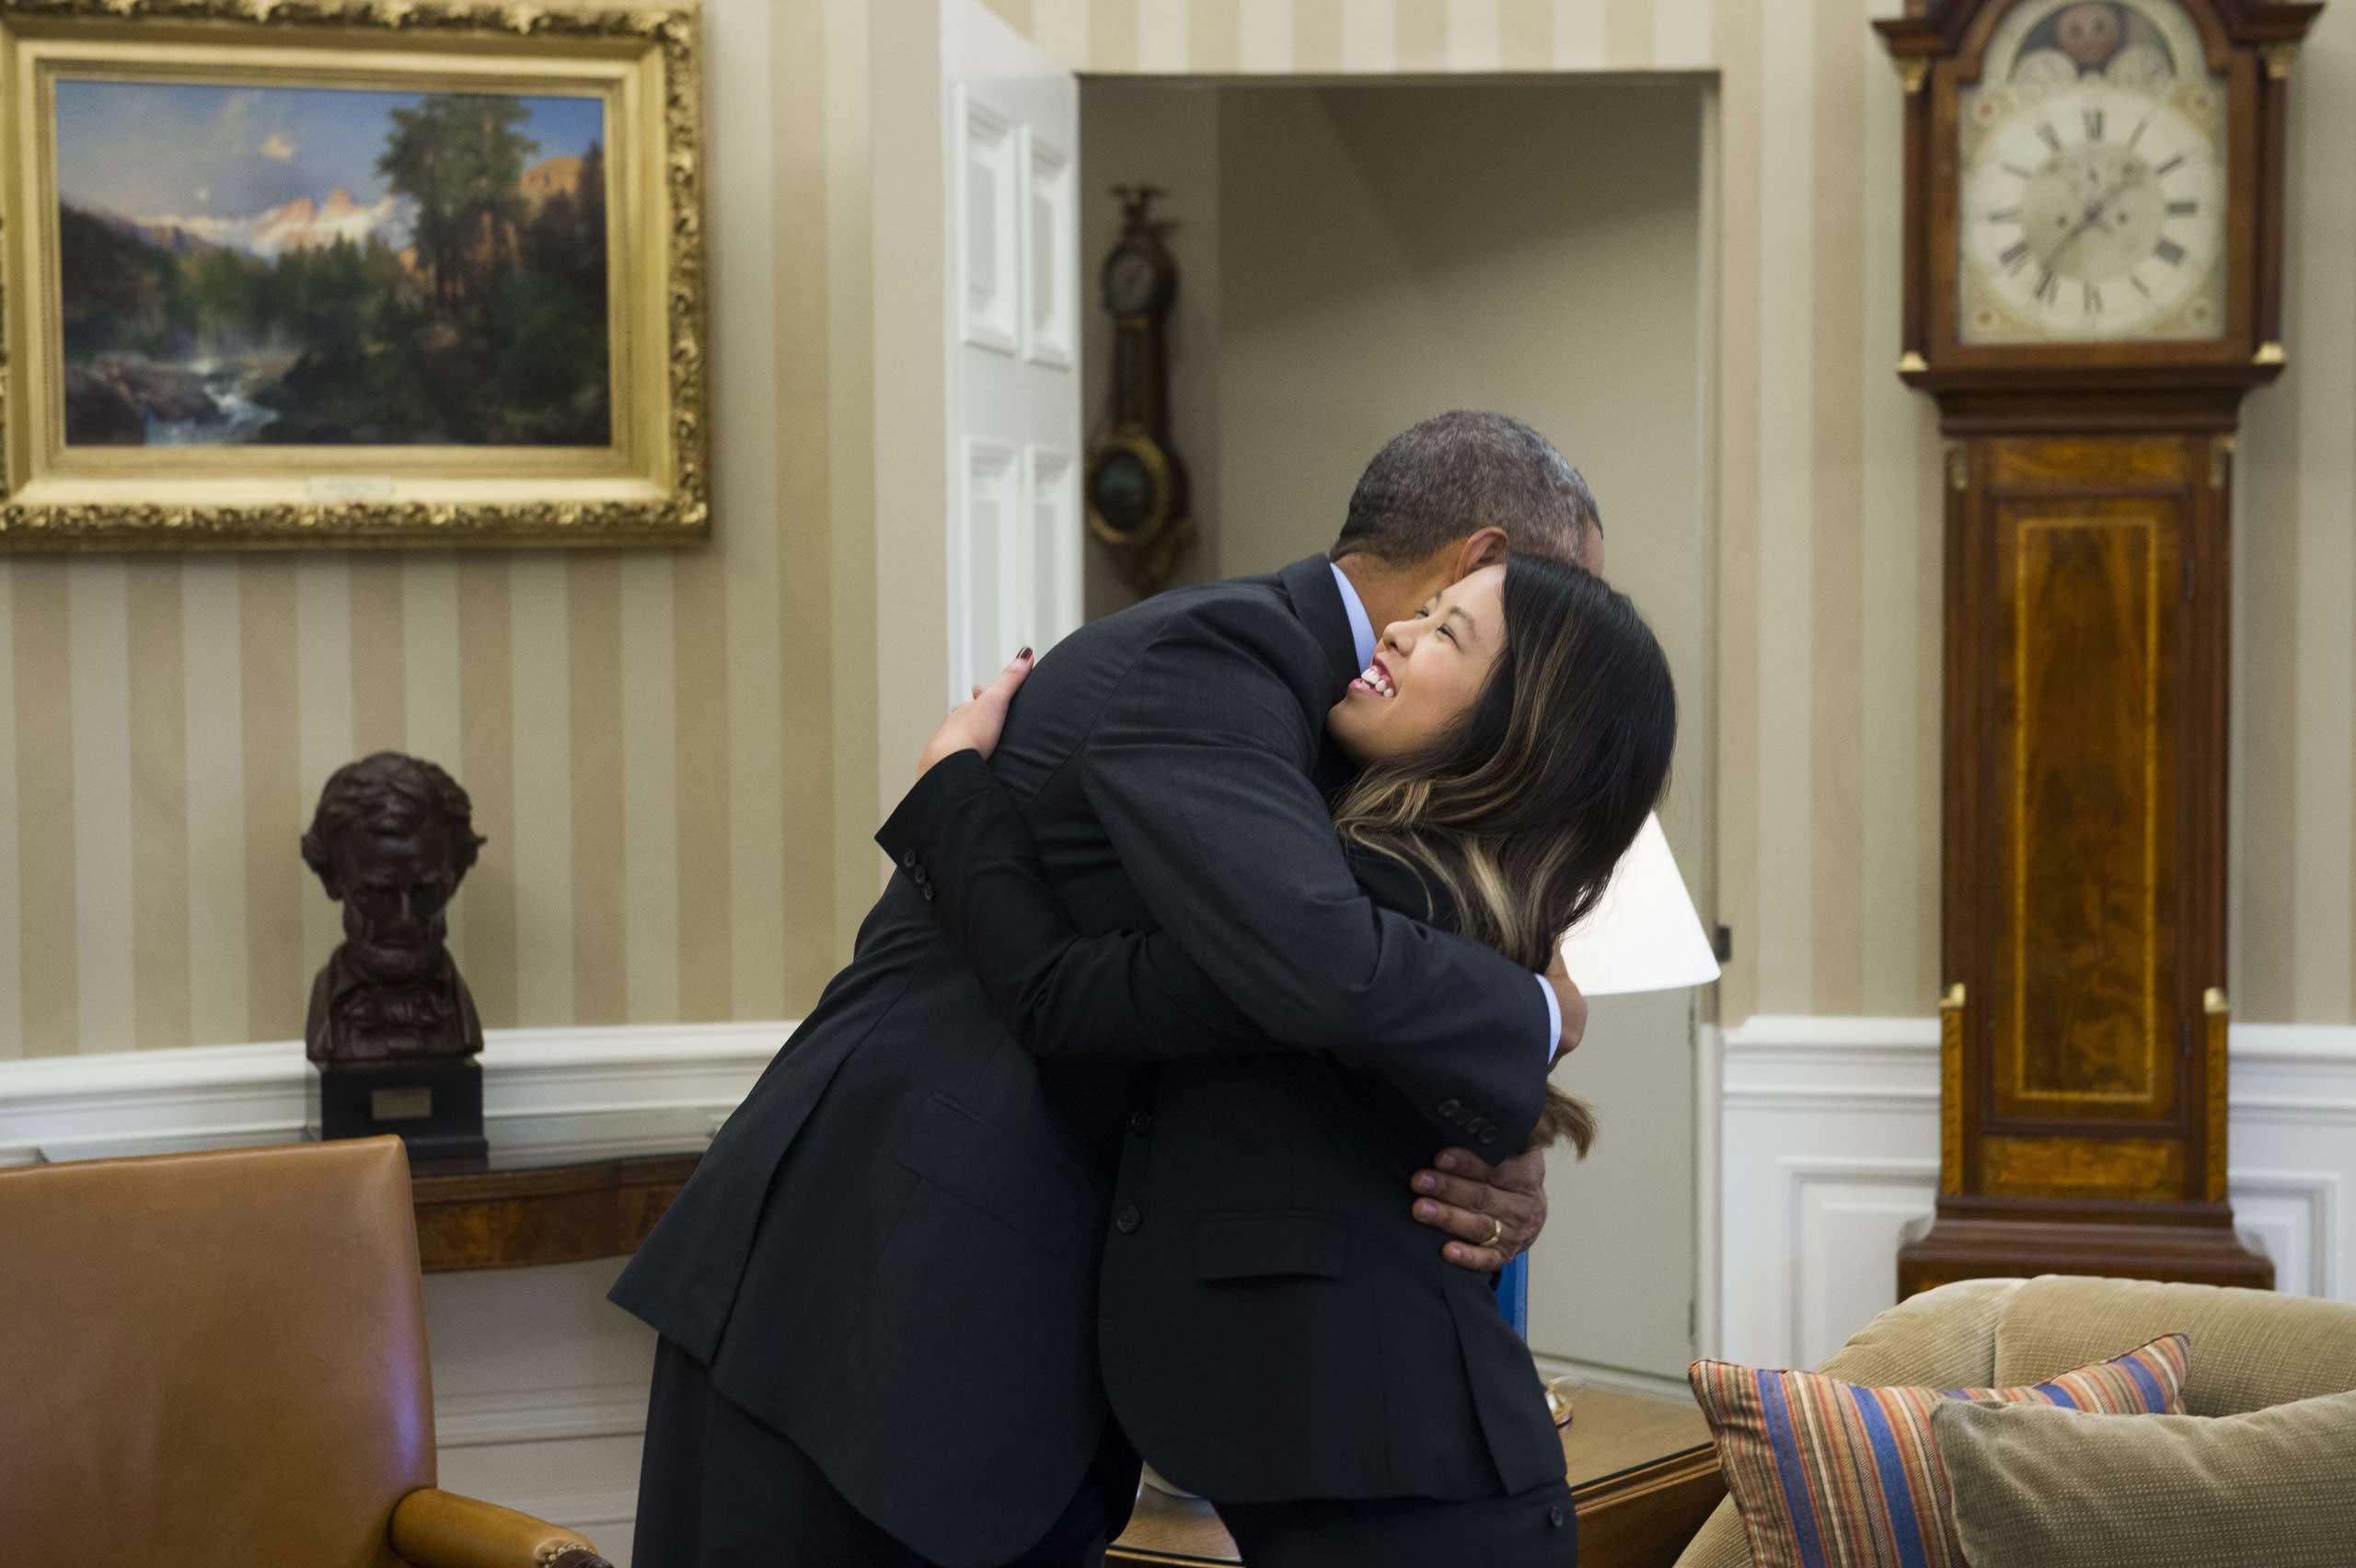 President Barack Obama hugs nurse Nina Pham, who was declared free of the Ebola virus after contracting the disease while caring for a Liberian patient in Texas, during a meeting in the Oval Office in Washington on Oct. 24, 2014. (Saul Loeb—AFP/Getty Images)